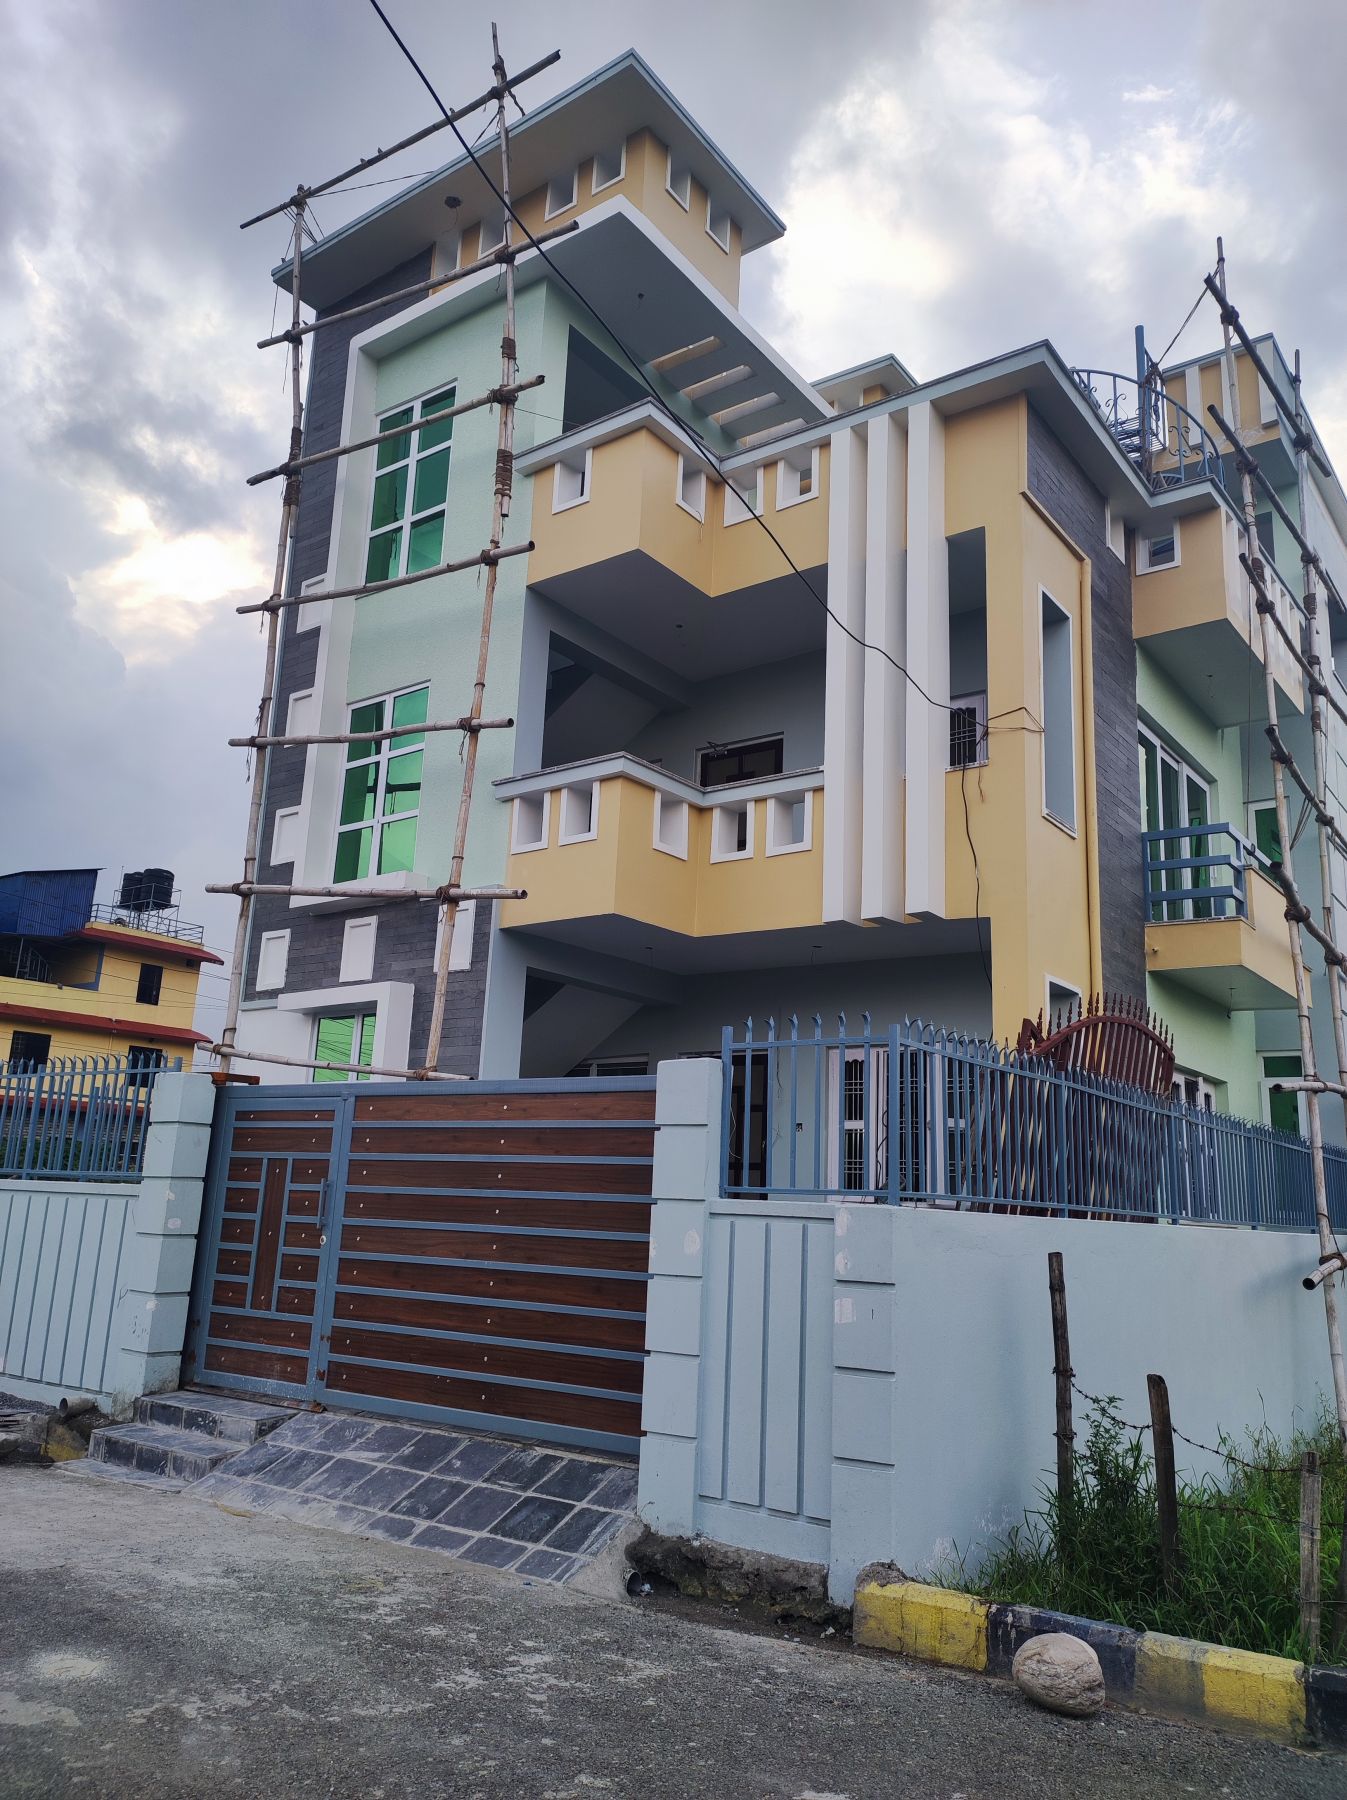 New house sale in pokhara-14 chauthe 